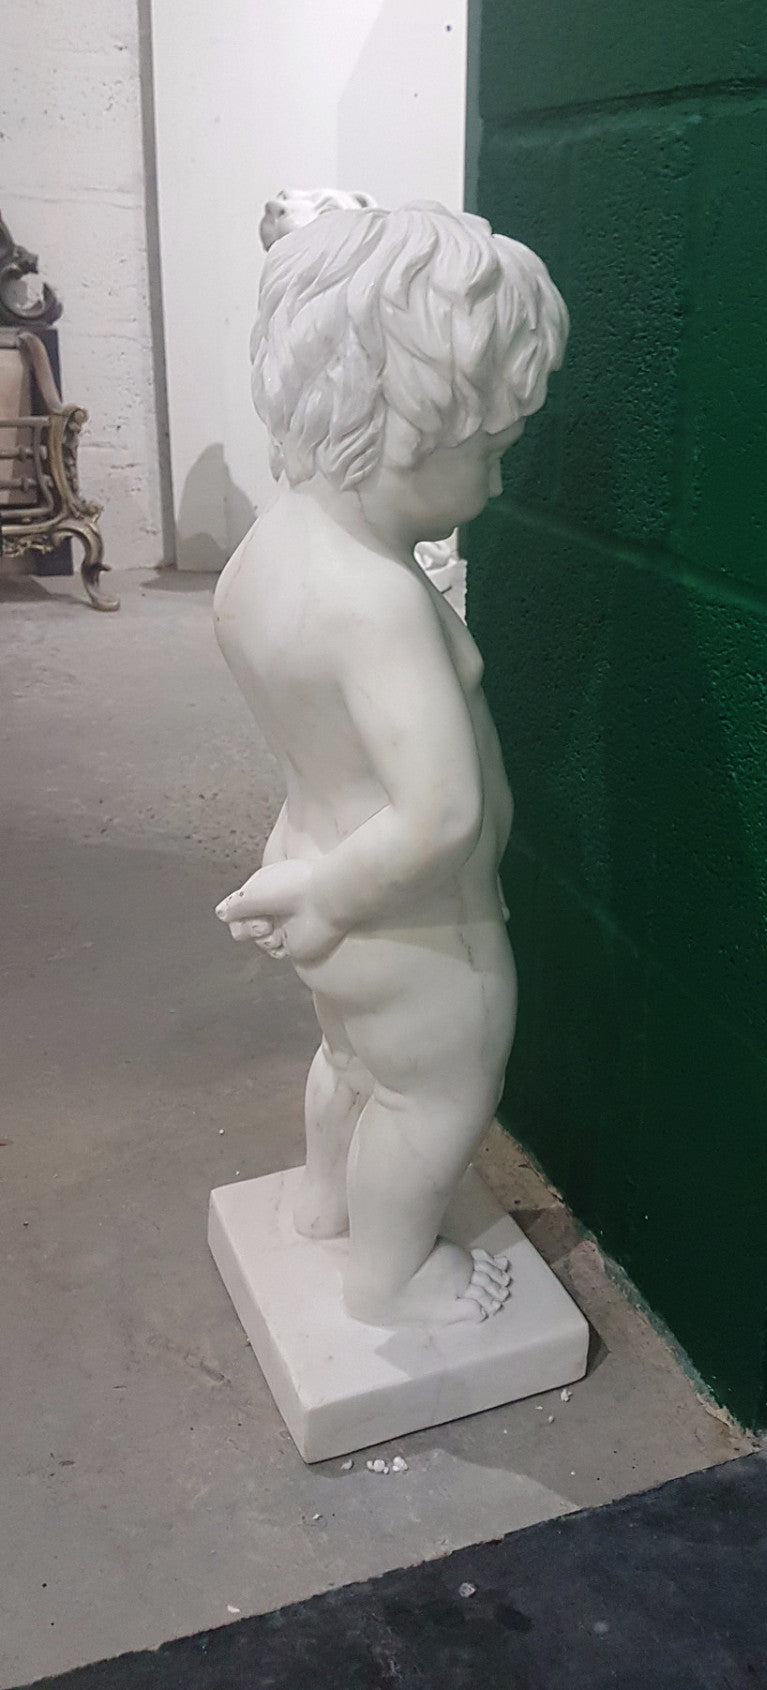 The Boys Will Be Boys Statue. (Veined White Marble)